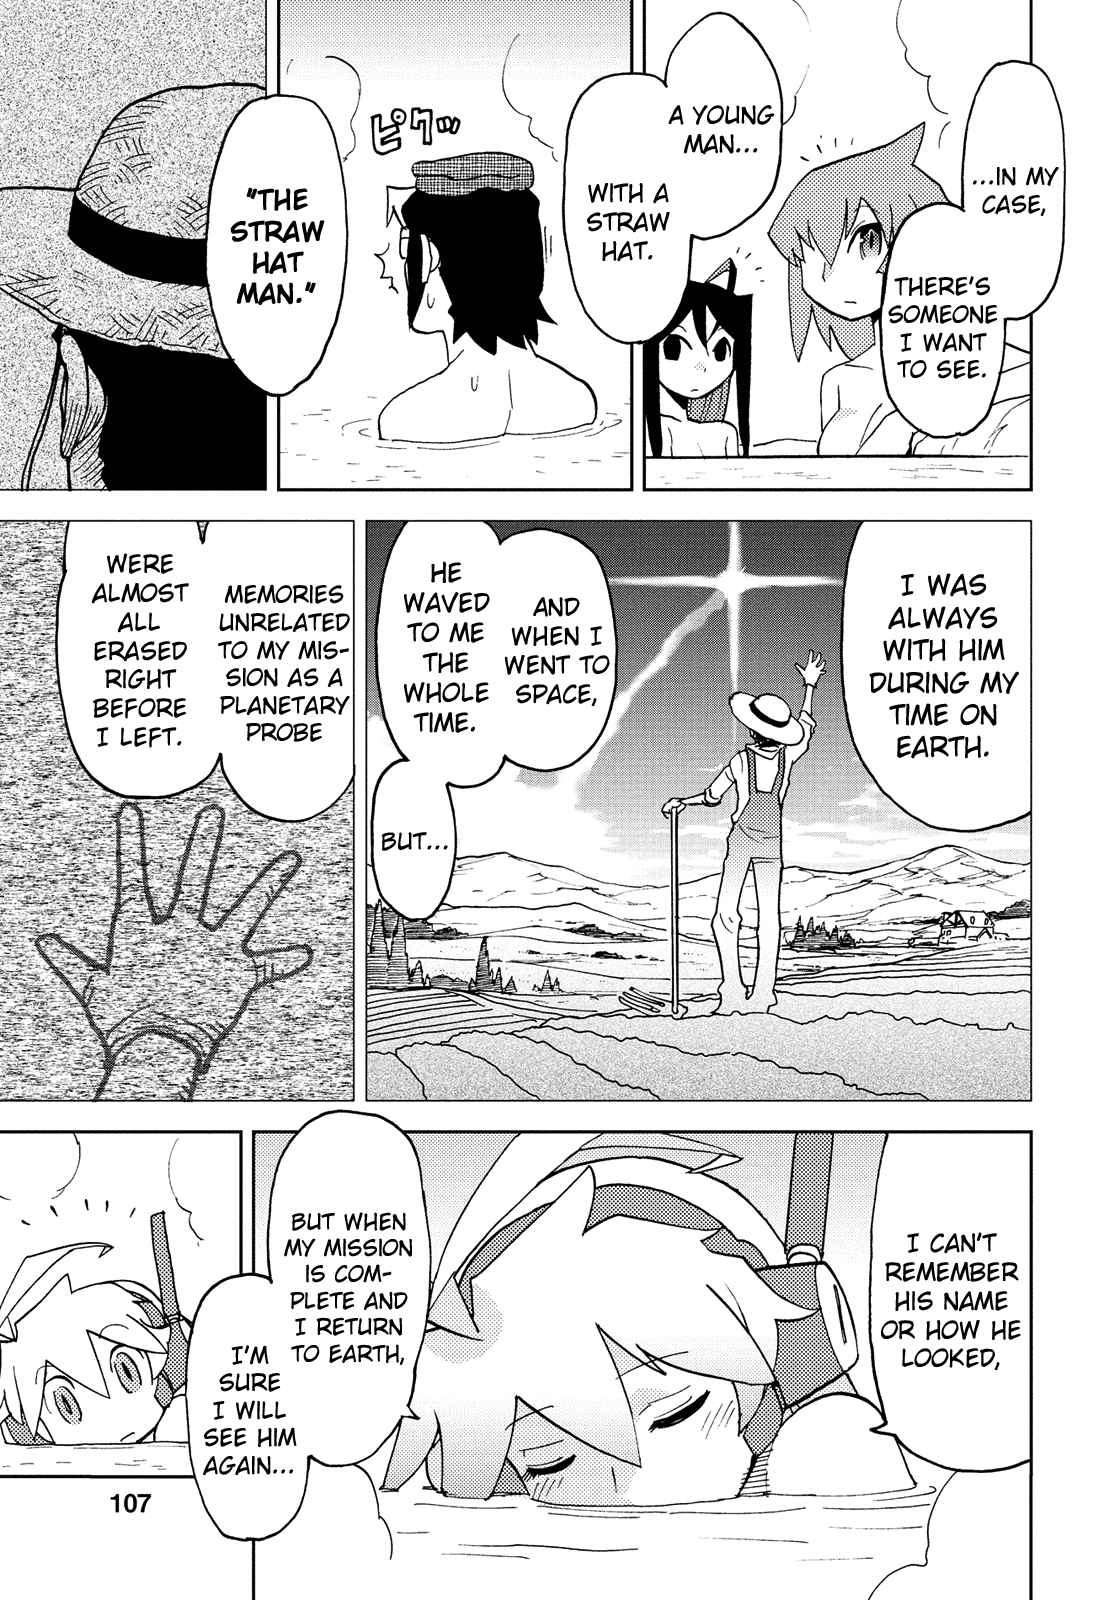 Choukadou Girl ⅙ Vol. 4 Ch. 41 Another World! Staying at a Hot Spring Inn With Figures